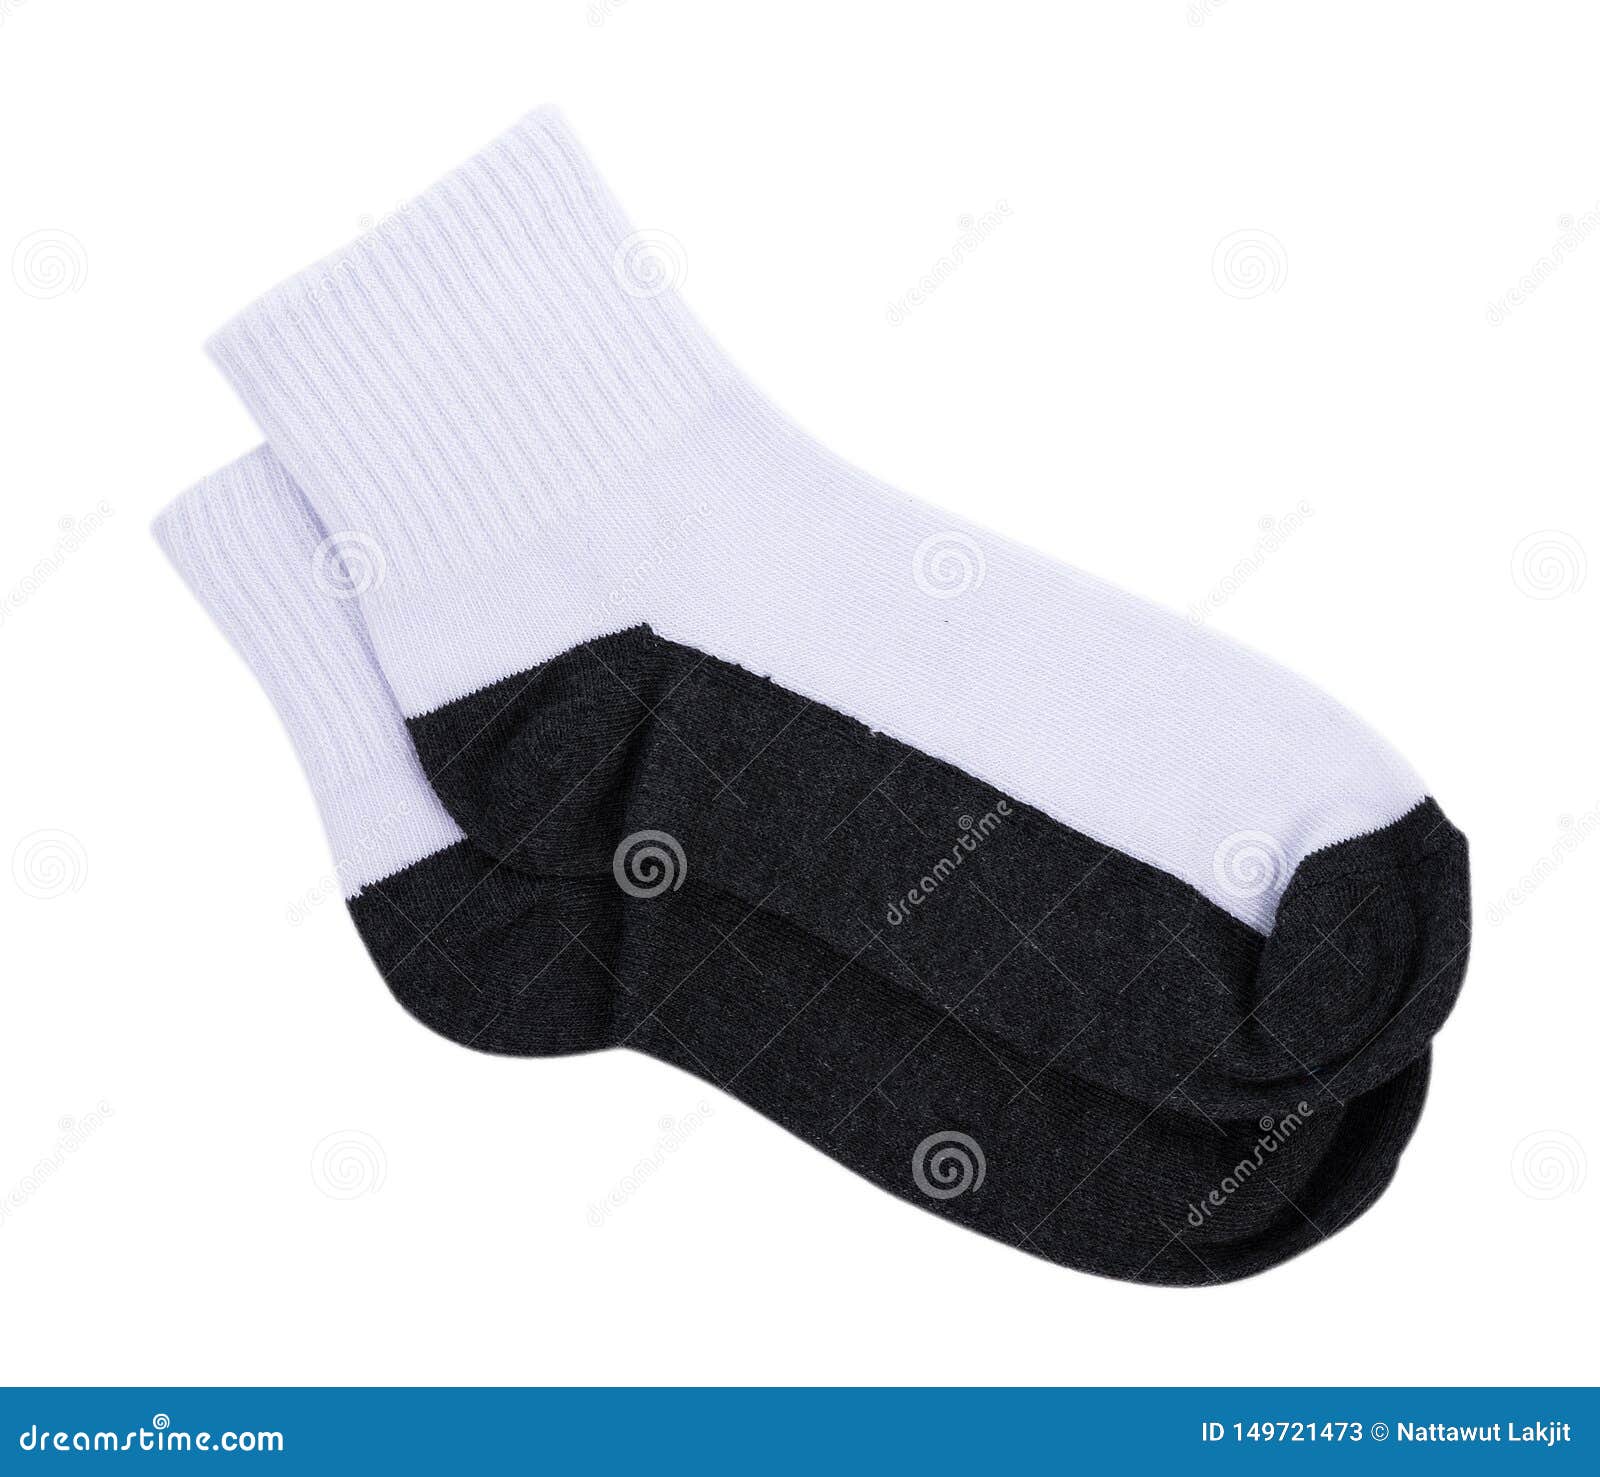 Sock Isolated on White Background Stock Image - Image of winter, pair ...